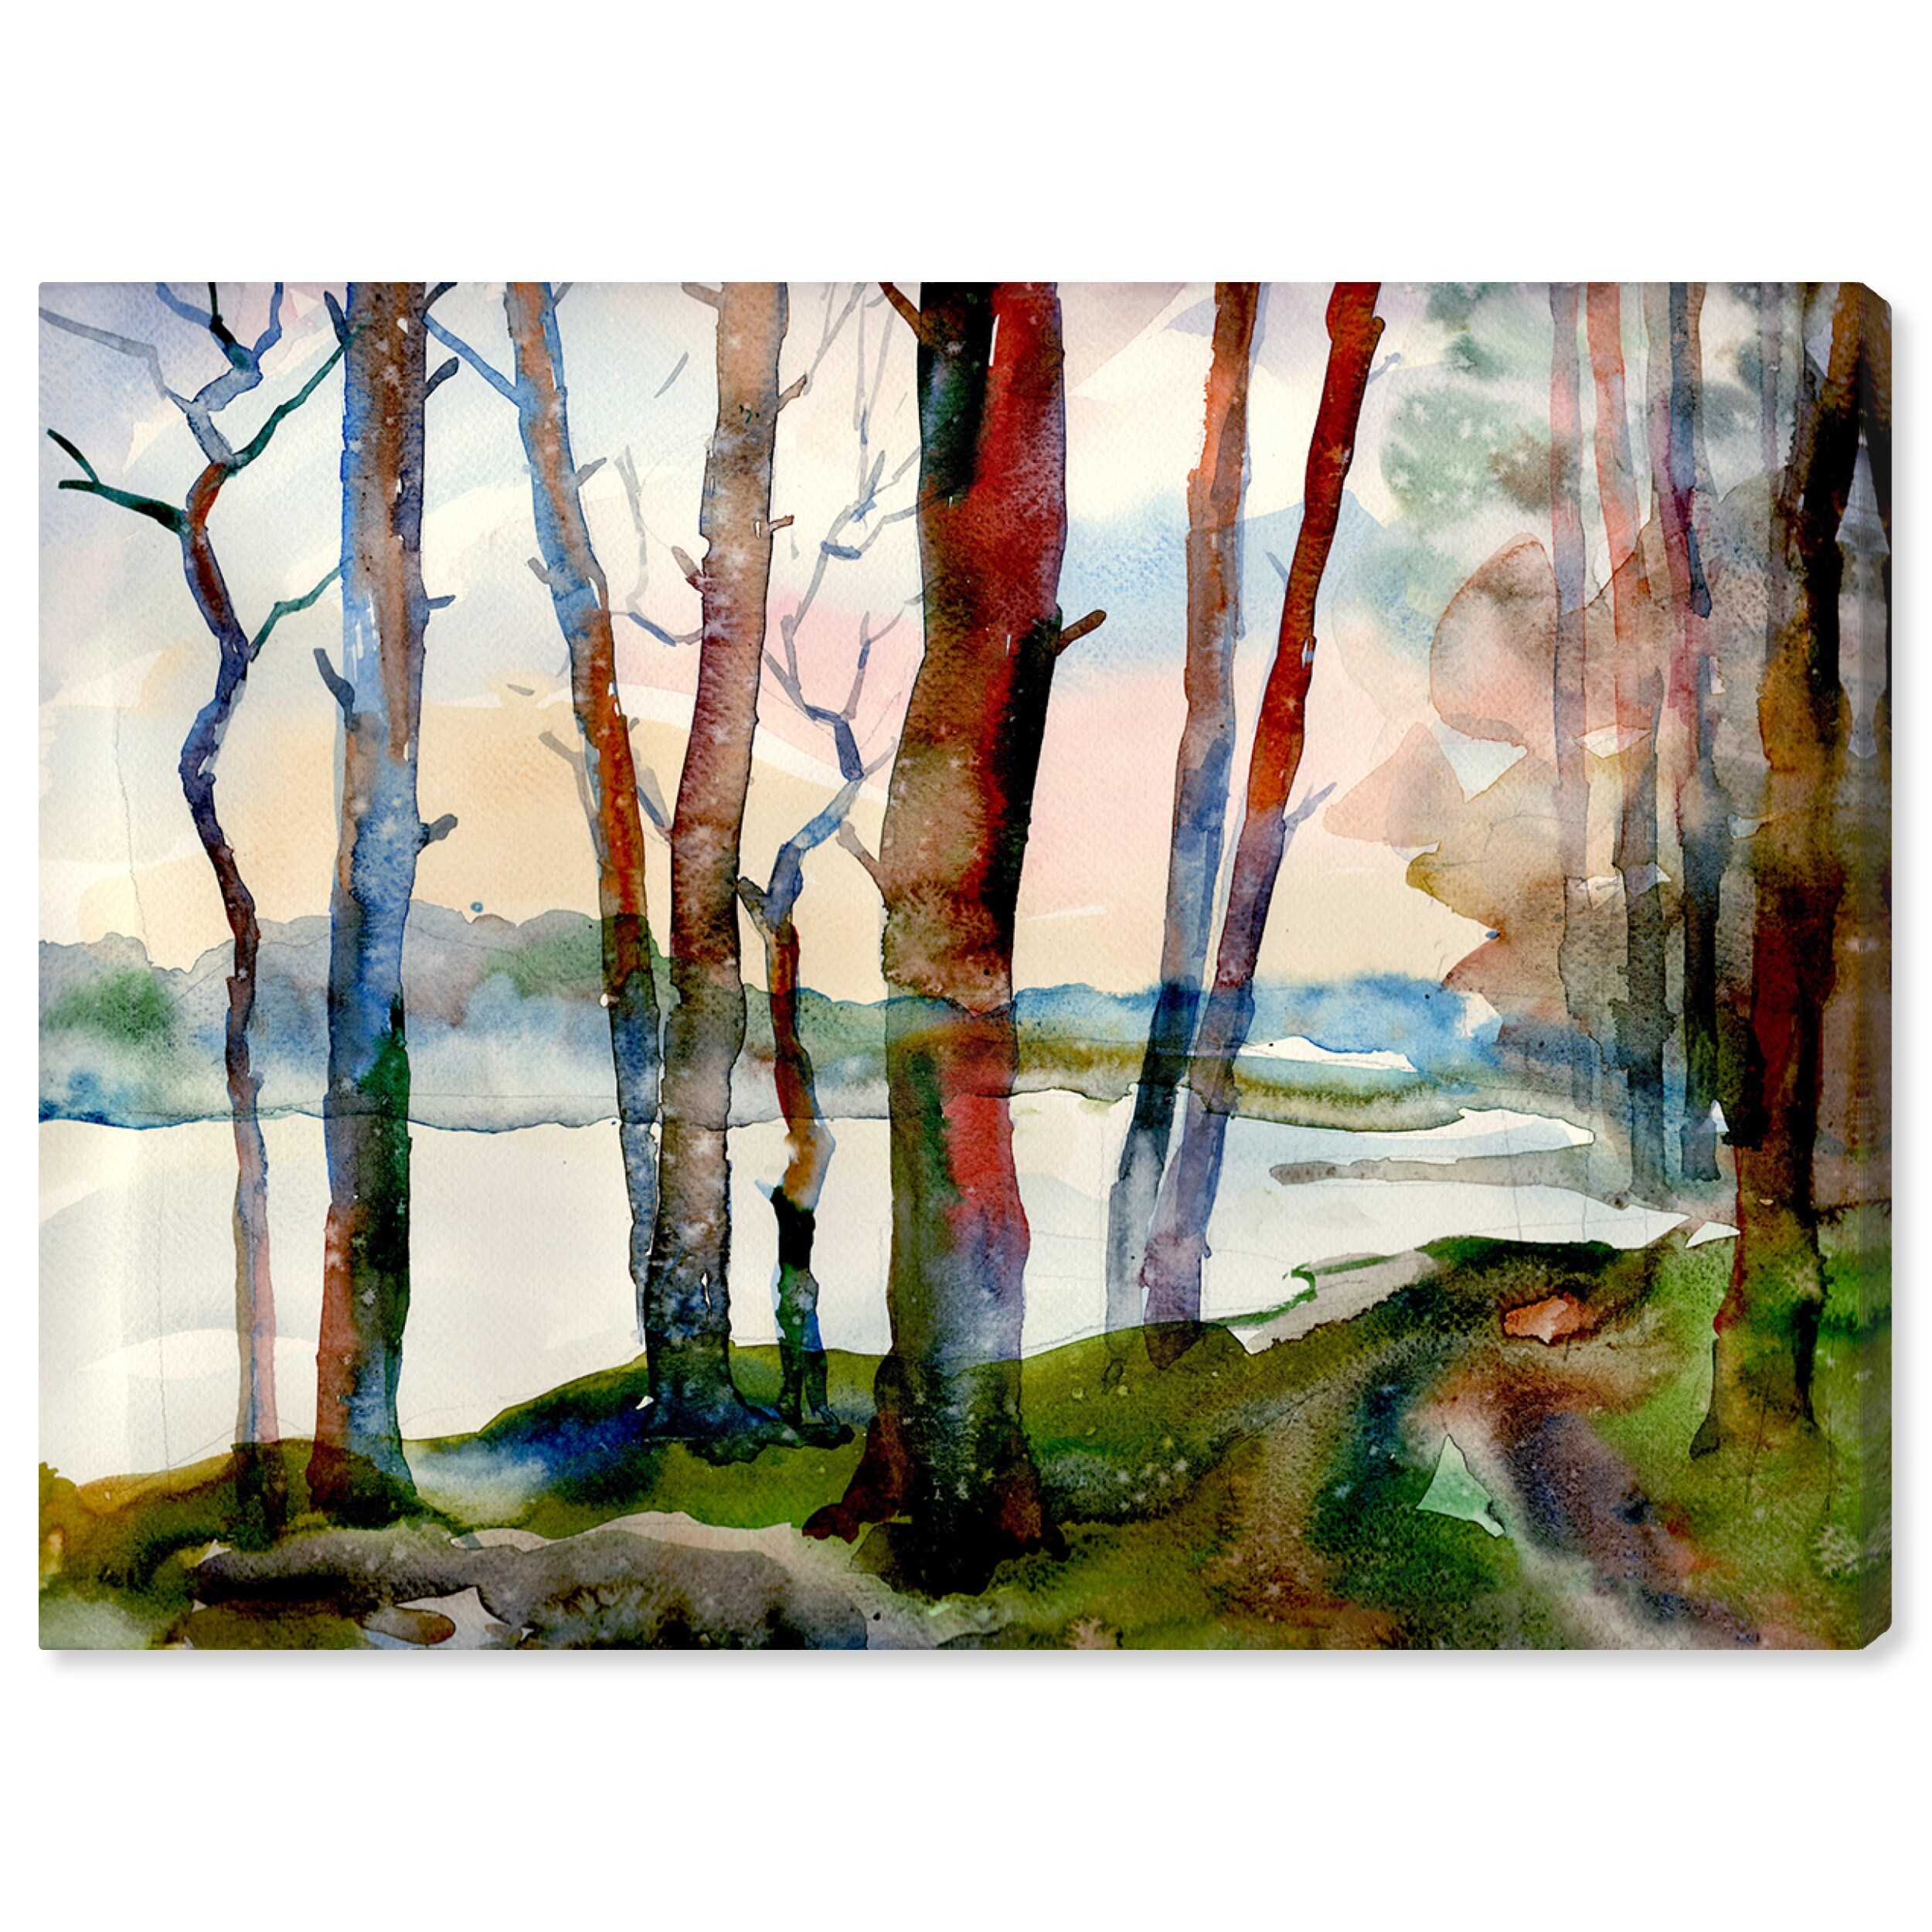 Rustic Landscape Painting Landscape Art Print Rustic Landscape Canvas Print Landscape Watercolor Rural Landscape In The Foggy November 3 Painting Art & Collectibles Sibawor.id